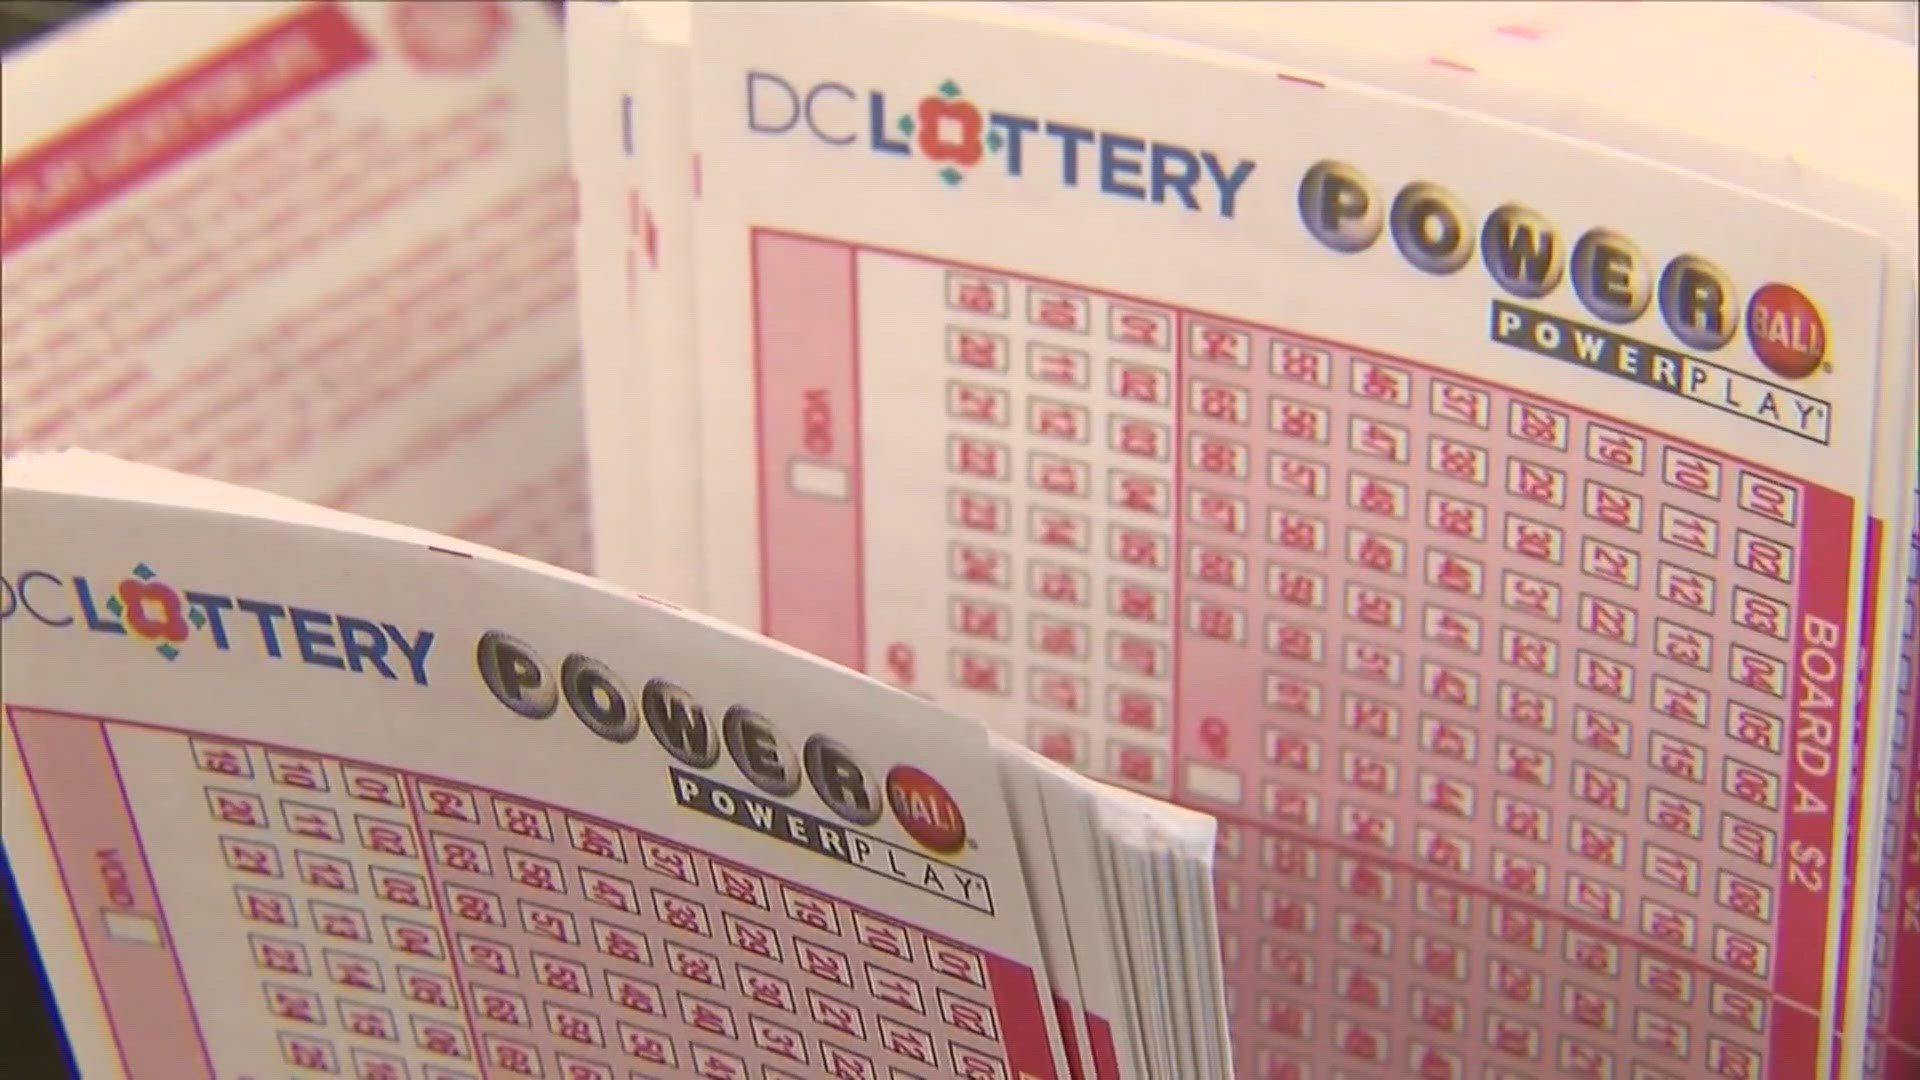 Darrin Duber-Smith with MSU breaks down what the odds are of winning a lottery jackpot.